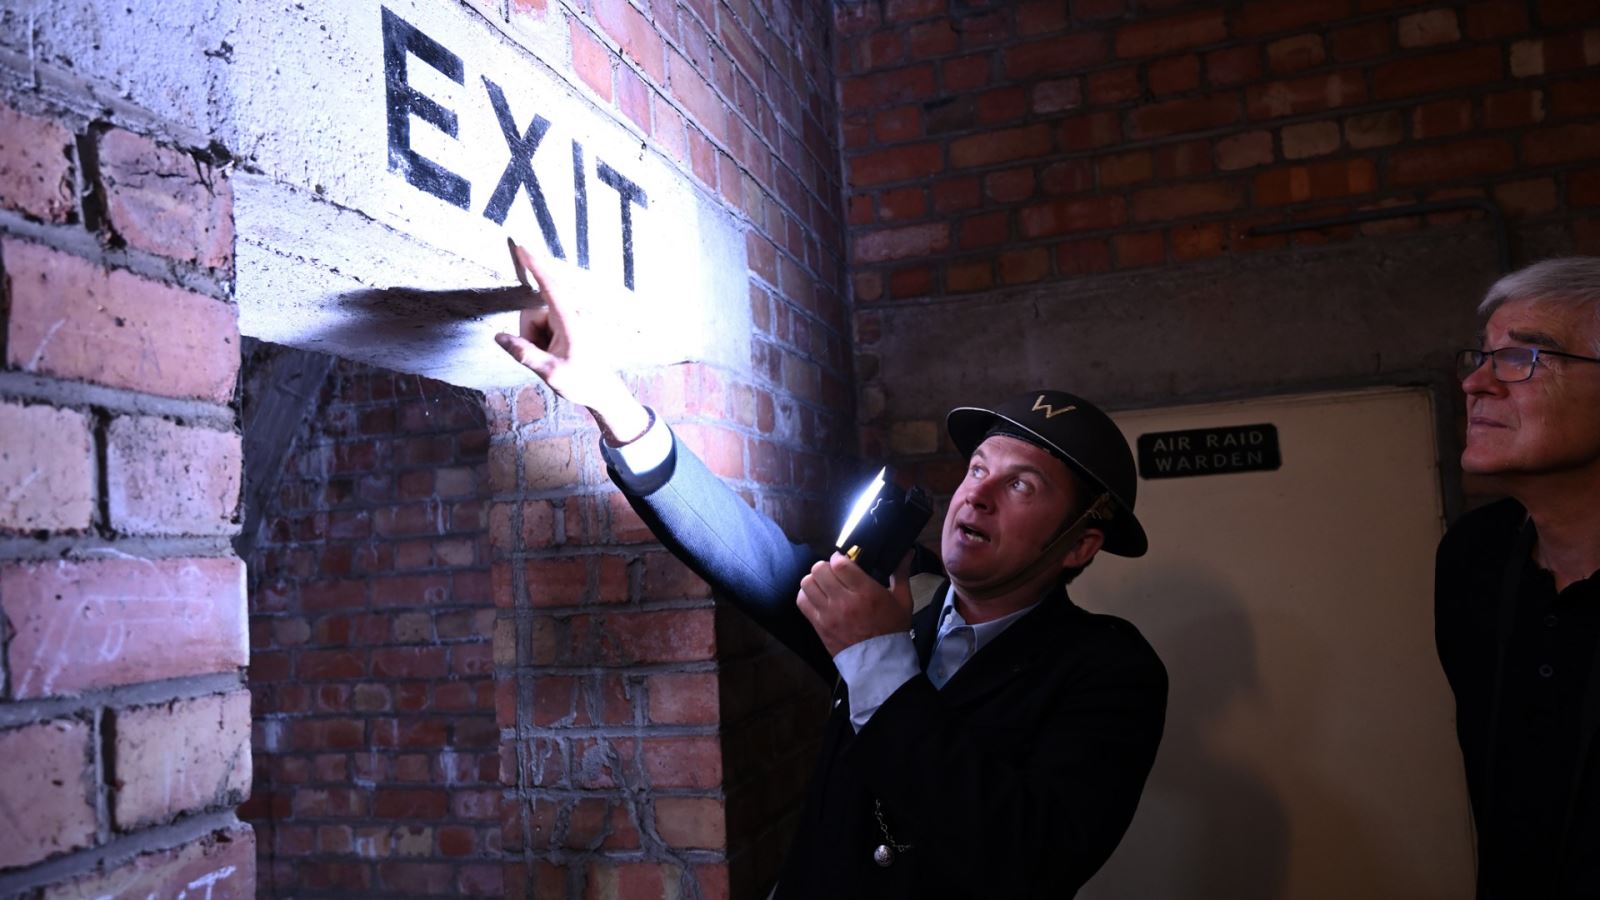 Man pointing at exit sign